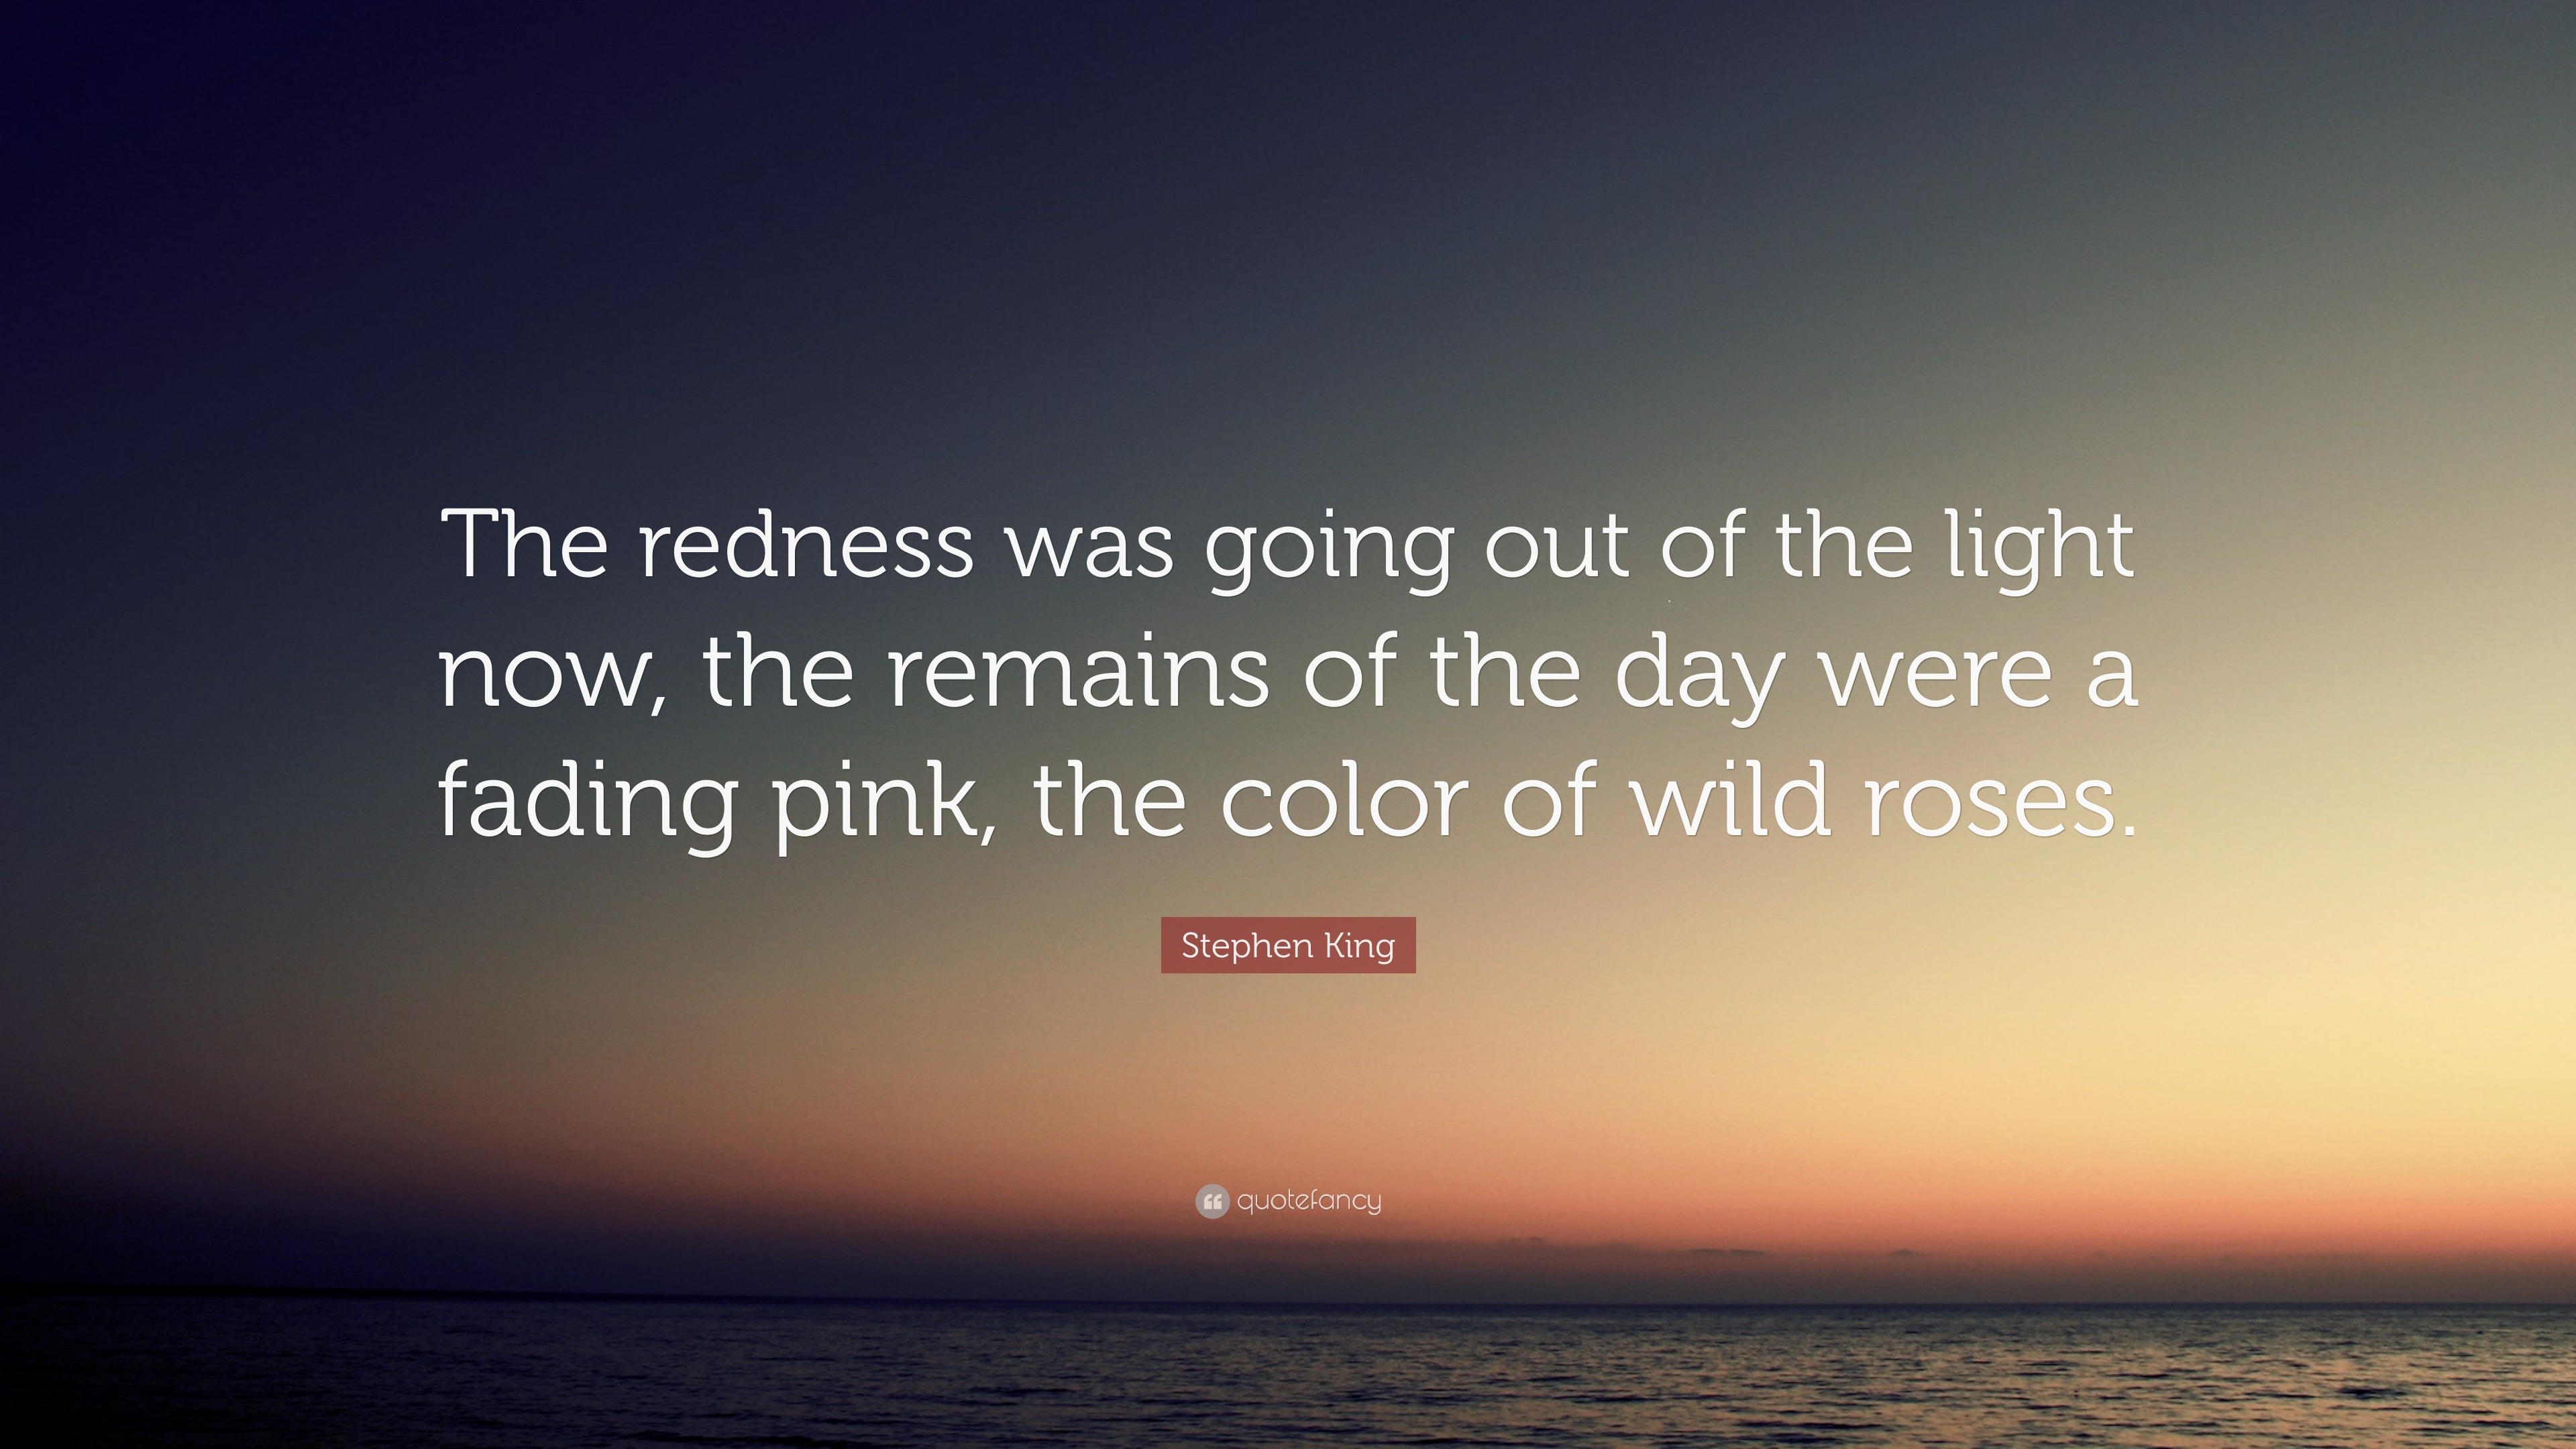 Stephen King Quote: "The redness was going out of the light now, the remains of the day were a ...